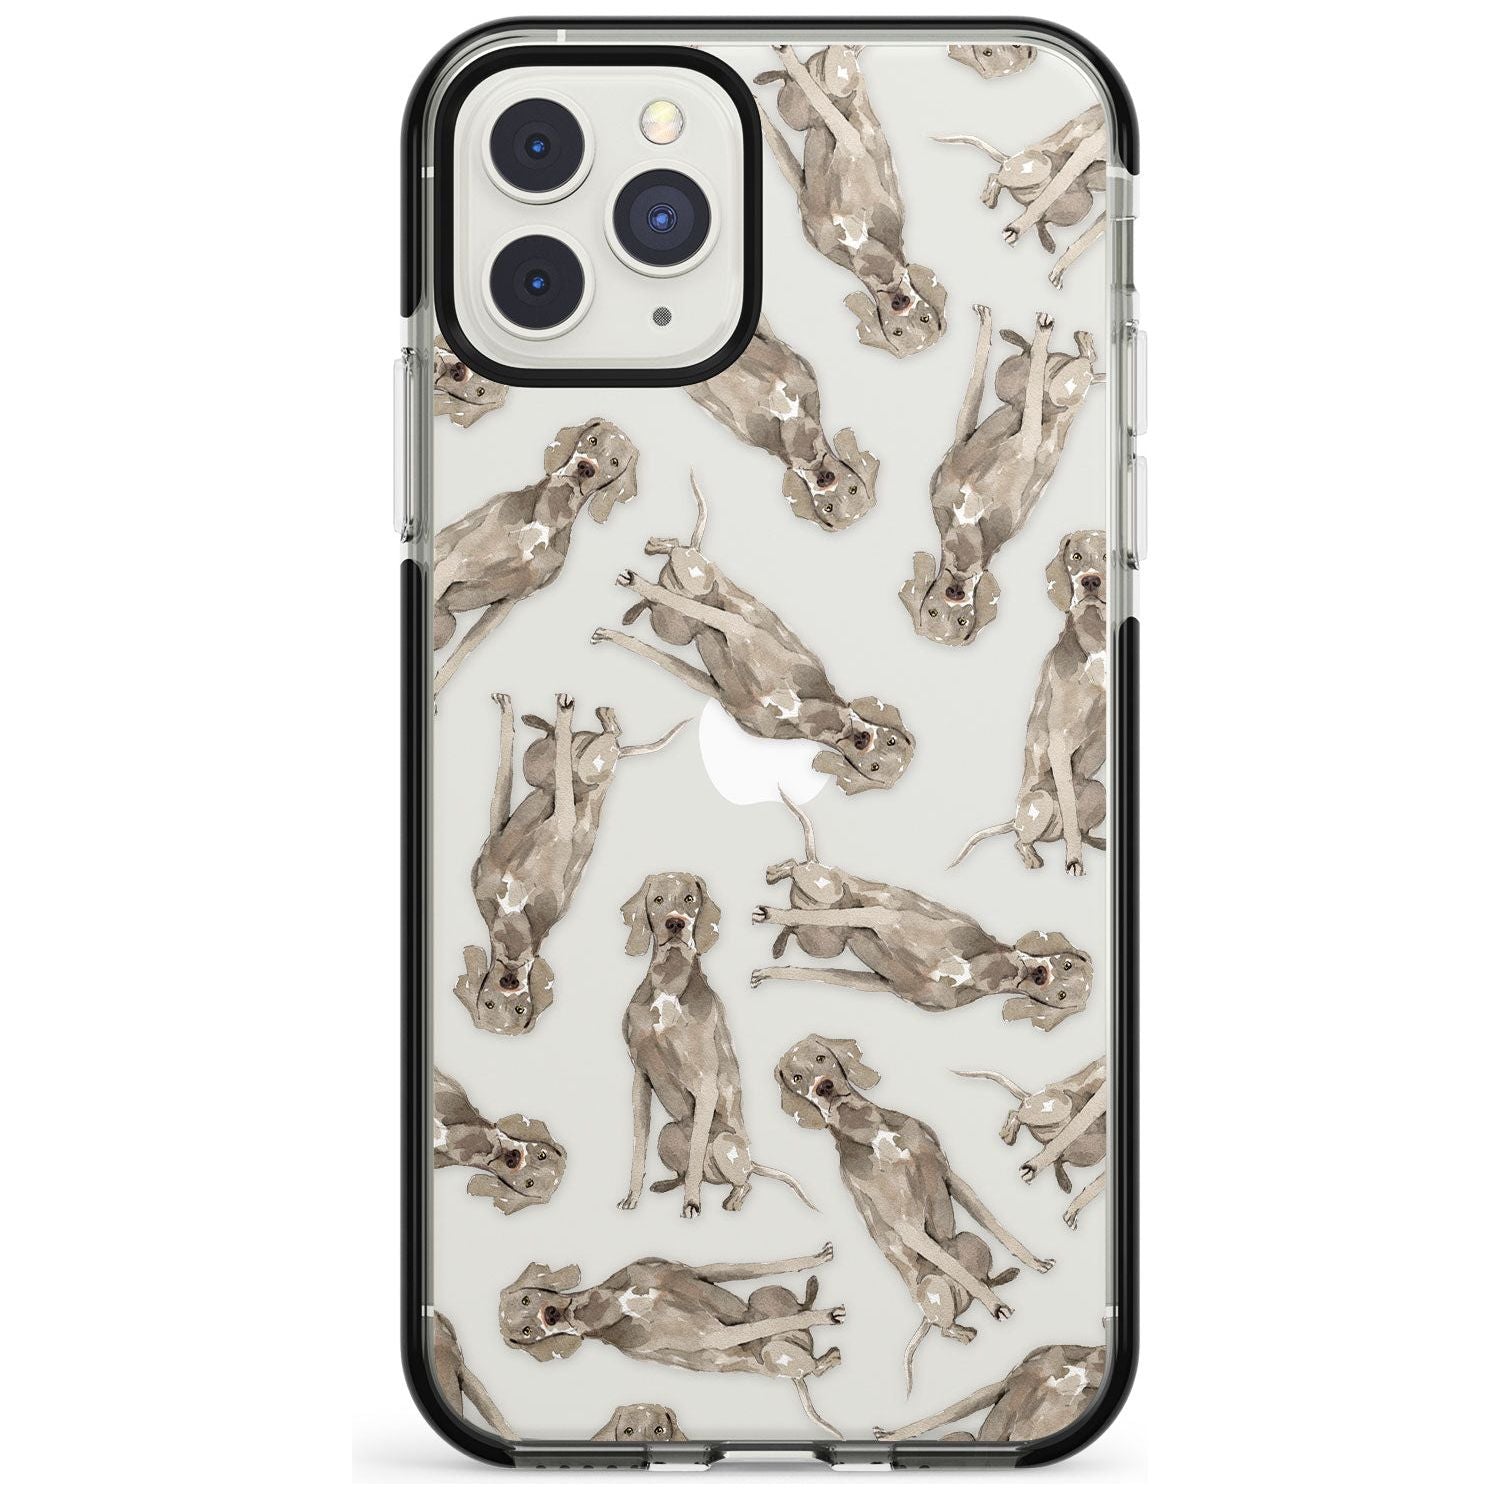 Weimaraner Watercolour Dog Pattern Black Impact Phone Case for iPhone 11 Pro Max